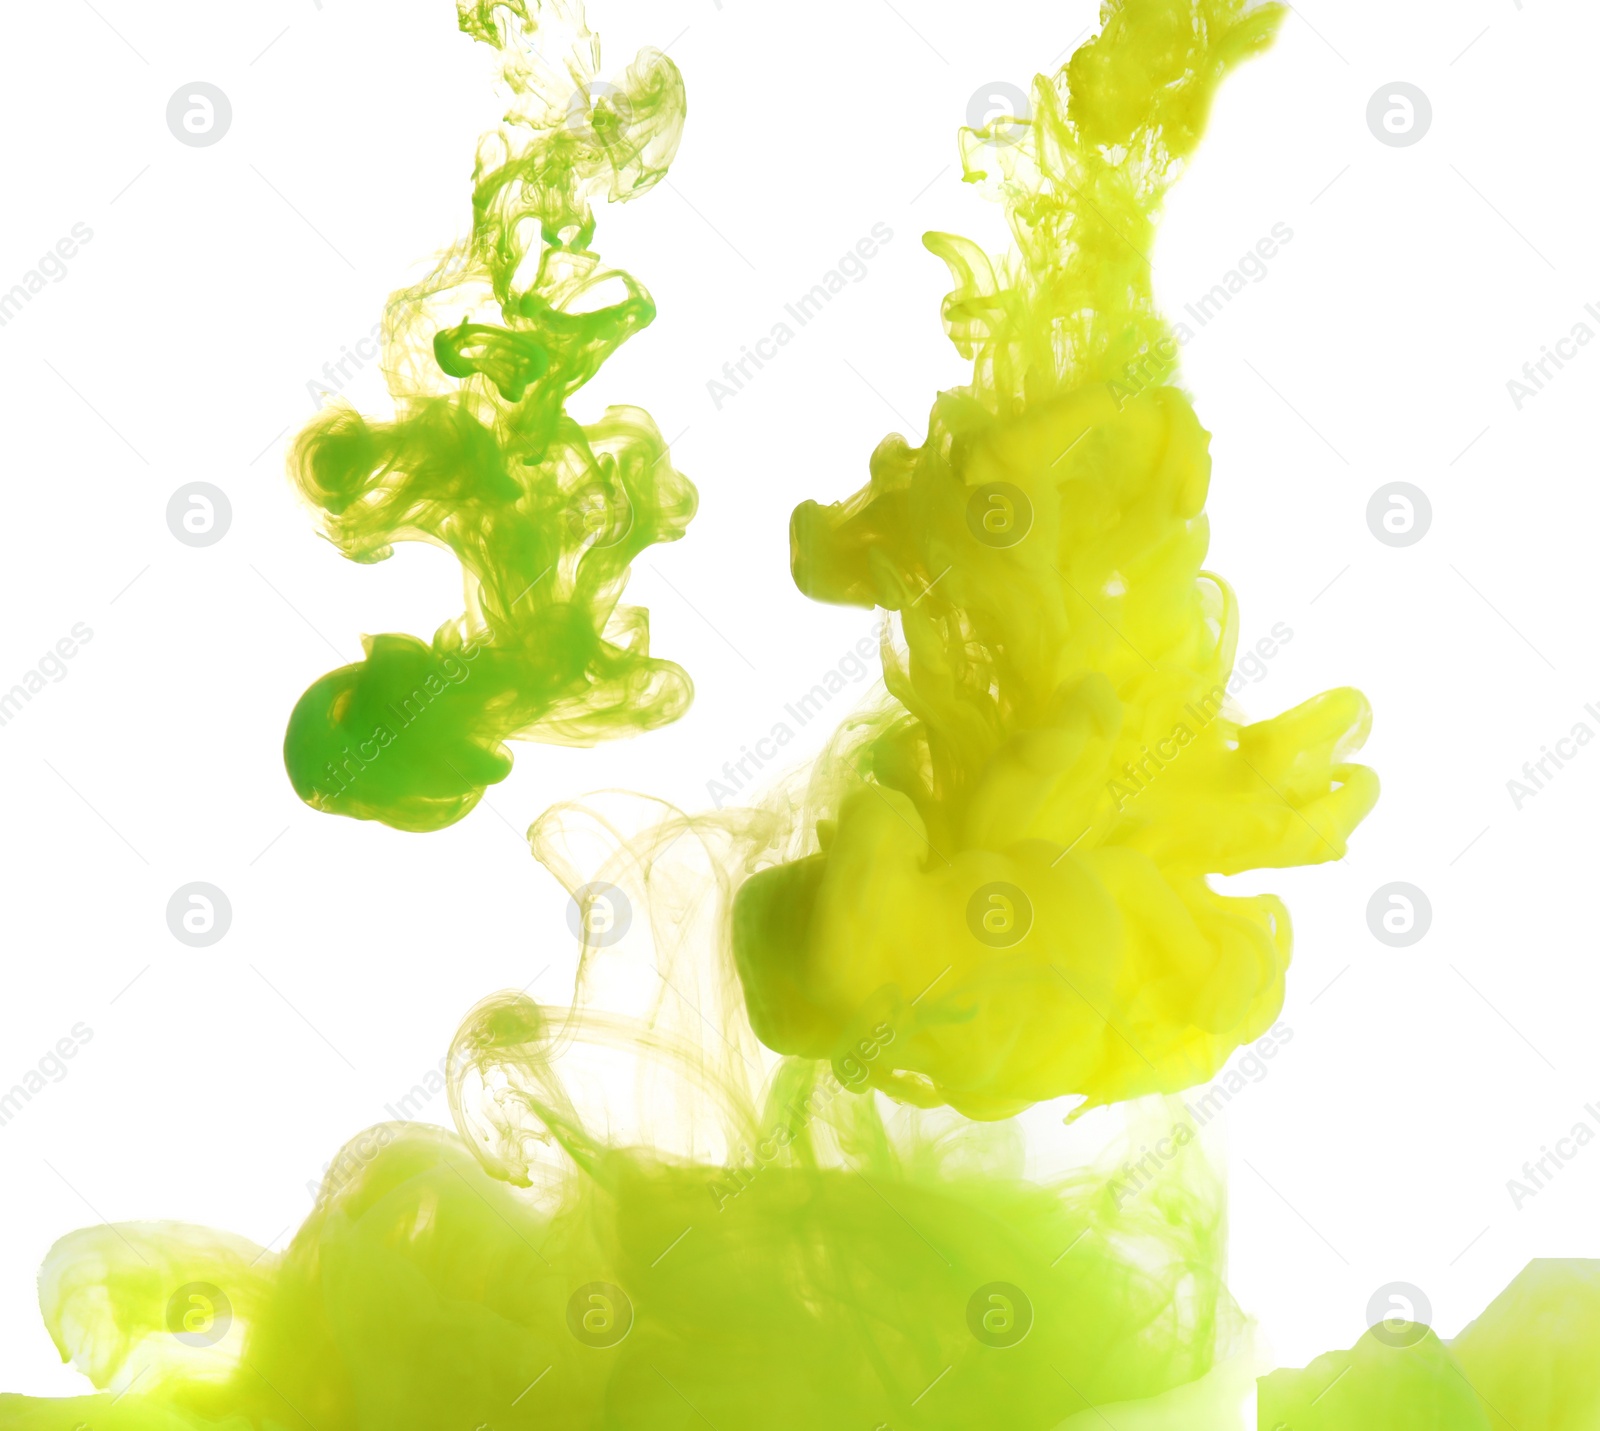 Photo of Splashes of yellow and green inks on light background, closeup